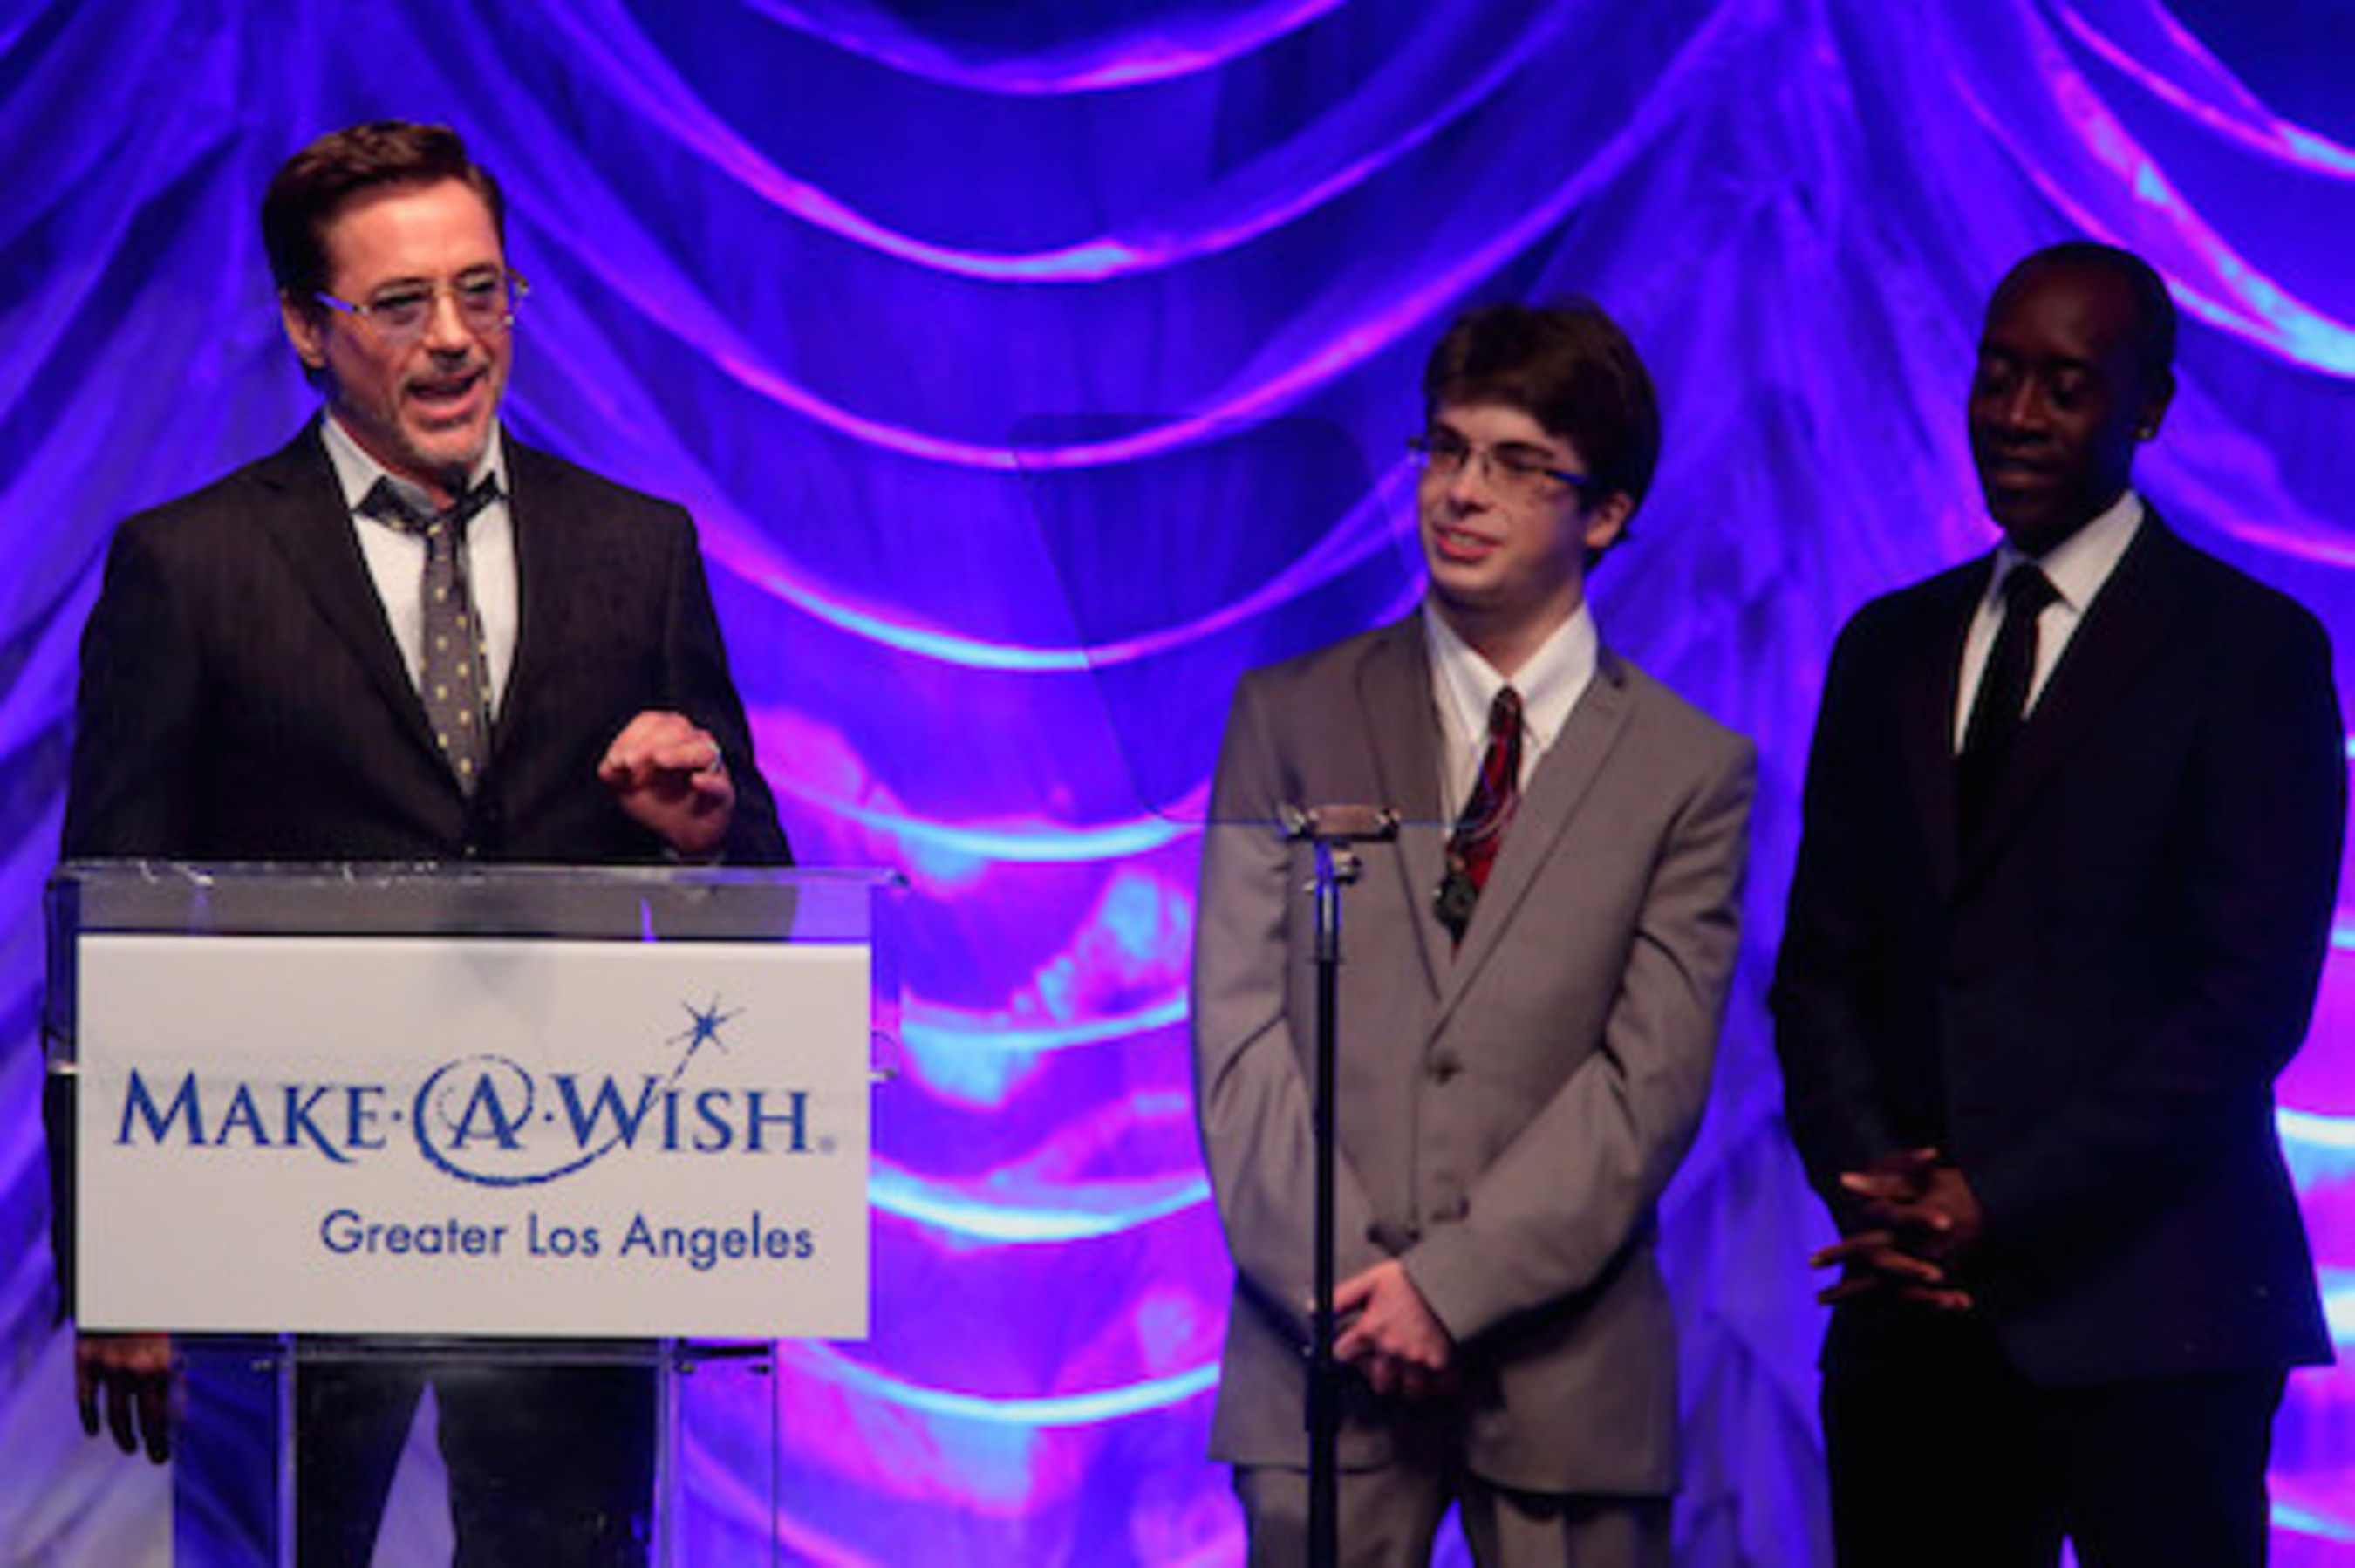 Oscar(R)-nominated actor Don Cheadle and Wish Kid Cameron Fisch (now age 22) presented Robert Downey Jr. with the Shining Star Award for the dozens of wishes that he has granted to children around the world. Downey fulfilled Cameron's wish five years ago when he invited the then 17-year-old, who has a nervous system disorder, to the movie set of The Avengers. Photo Credit: Craig T. Mathew and Greg Grudt/Mathew Imaging